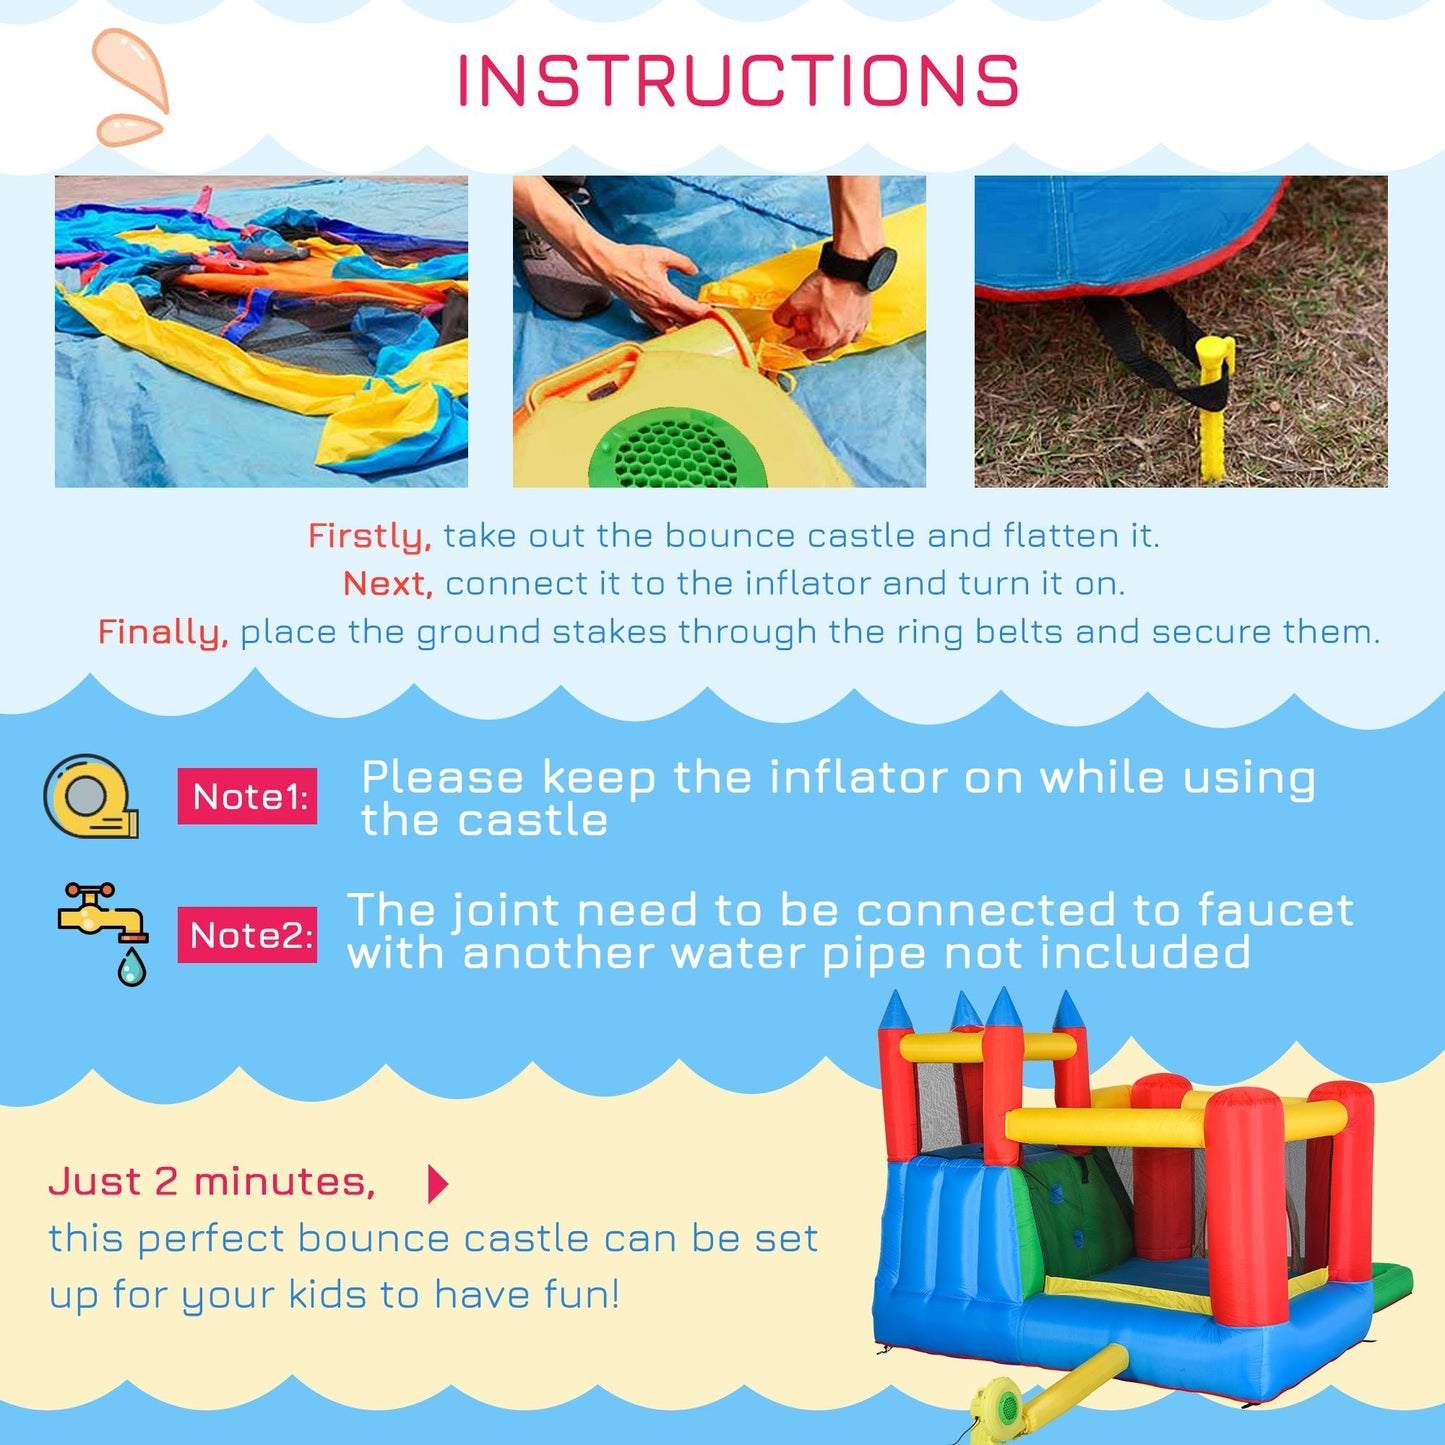 Miscellaneous-Kids Inflatable Water Slide 6 in 1 Water Park Bounce House Jumping Castle Water Pool Climbing Wall Basket w/ Air Blower for Summer Playland - Outdoor Style Company